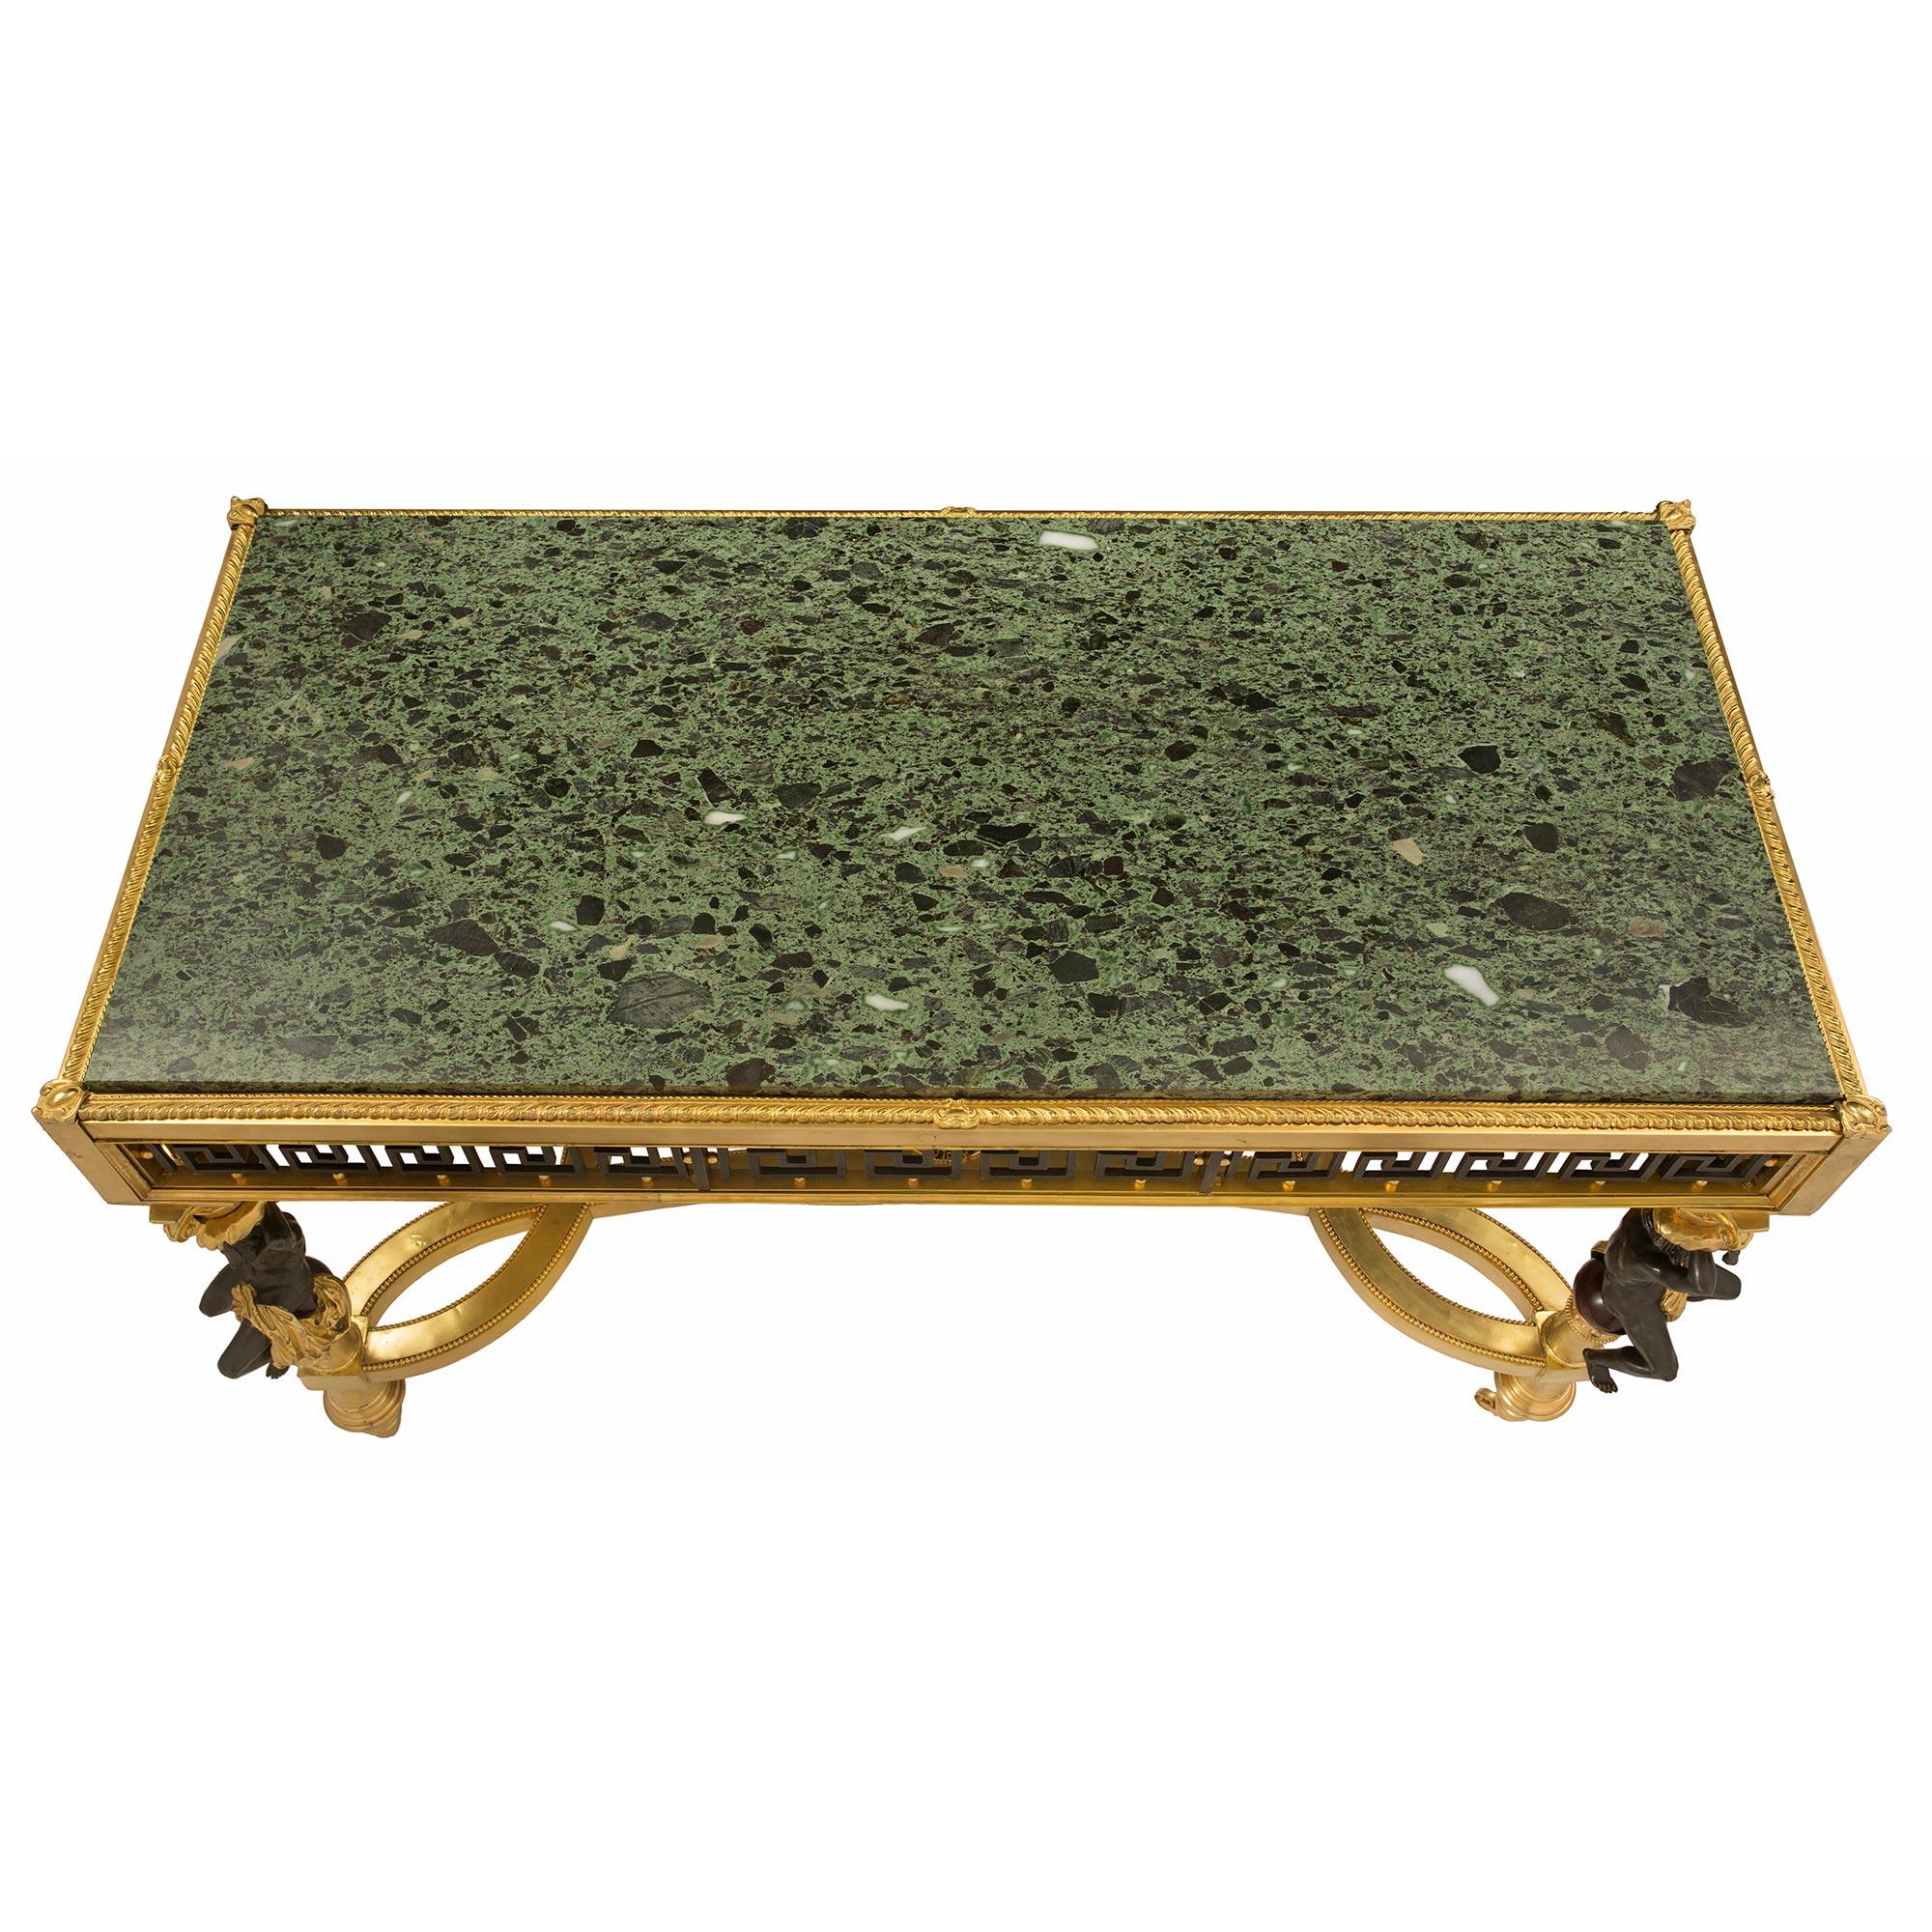 A sensational French 19th century Louis XVI st. ormolu, patinated bronze and Vert Antique marble center table. The table the raised by its original casters below elegant spiral tapered fluted feet. Each leg displays most impressive and richly chased